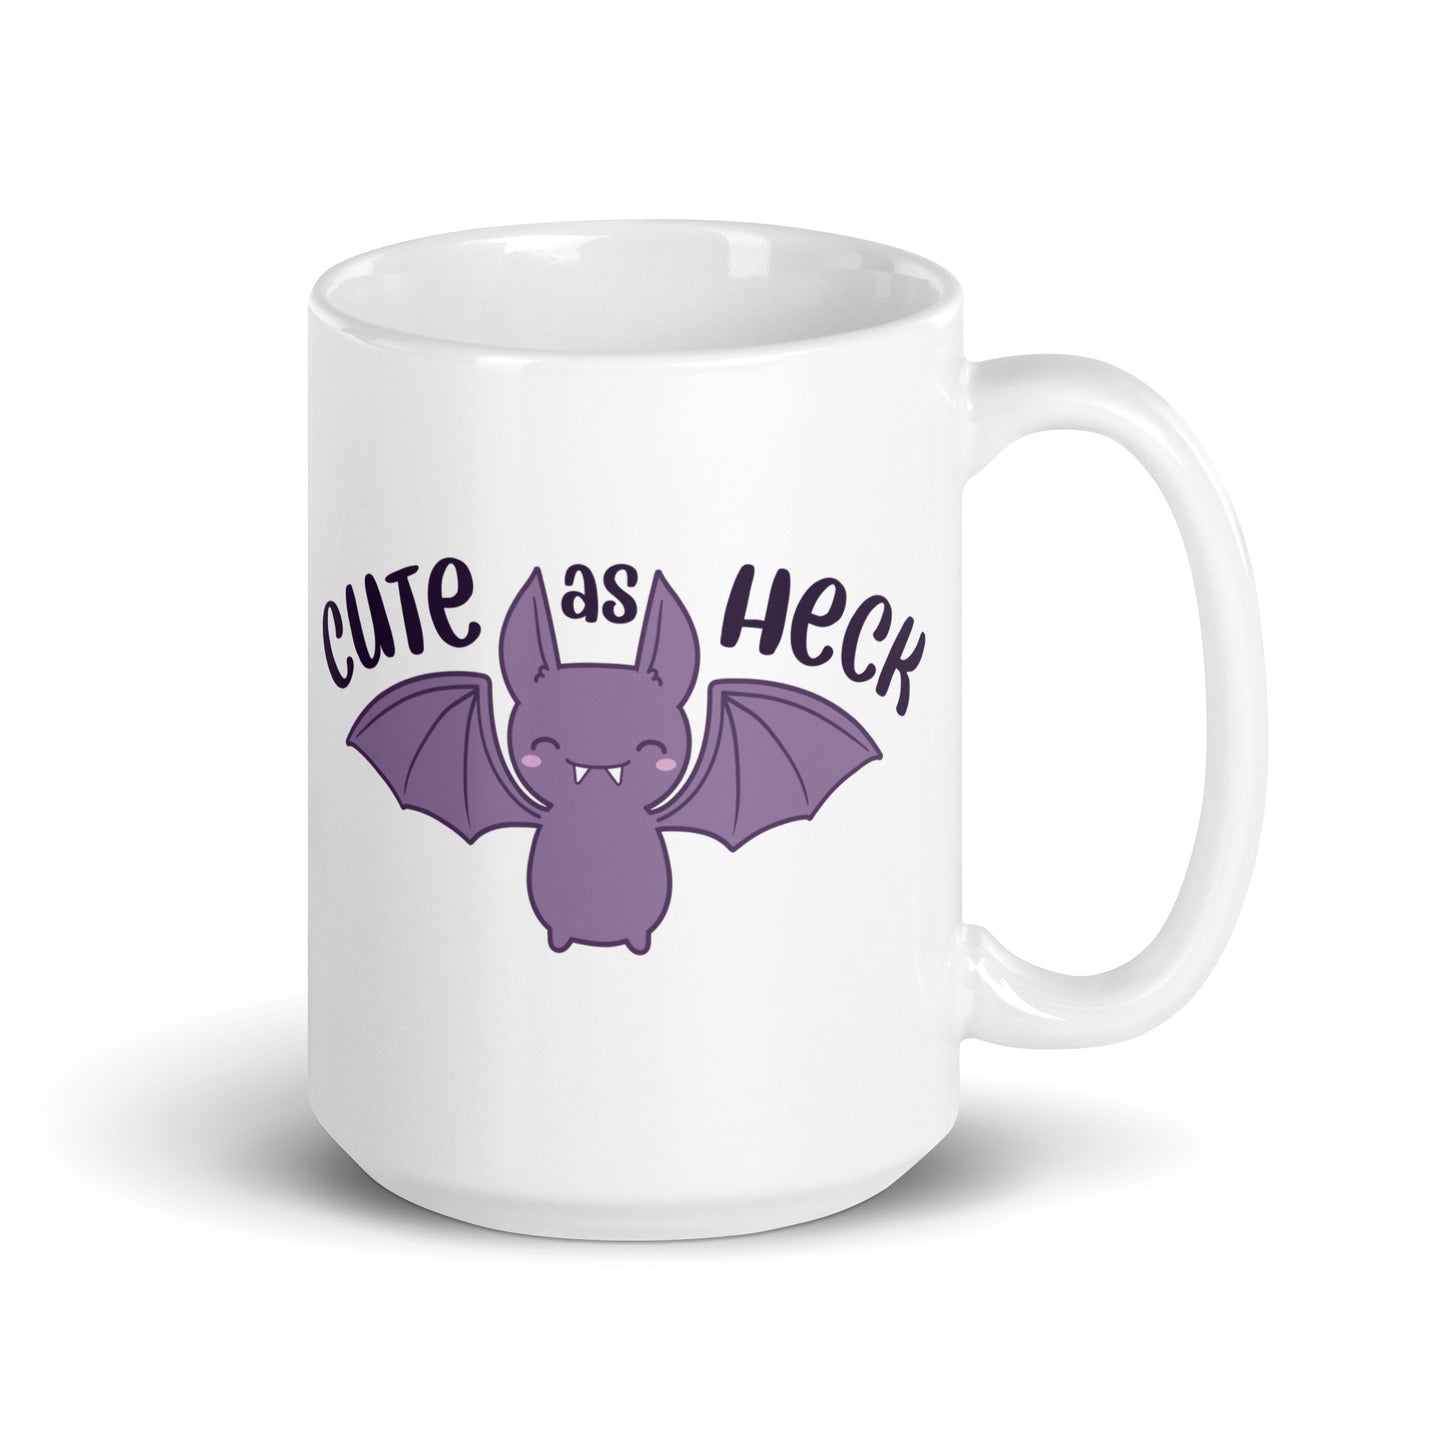 A 15 ounce white ceramic mug featuring an illustration of a smiling purple bat. Above the bat is text that reads "Cute As Heck"